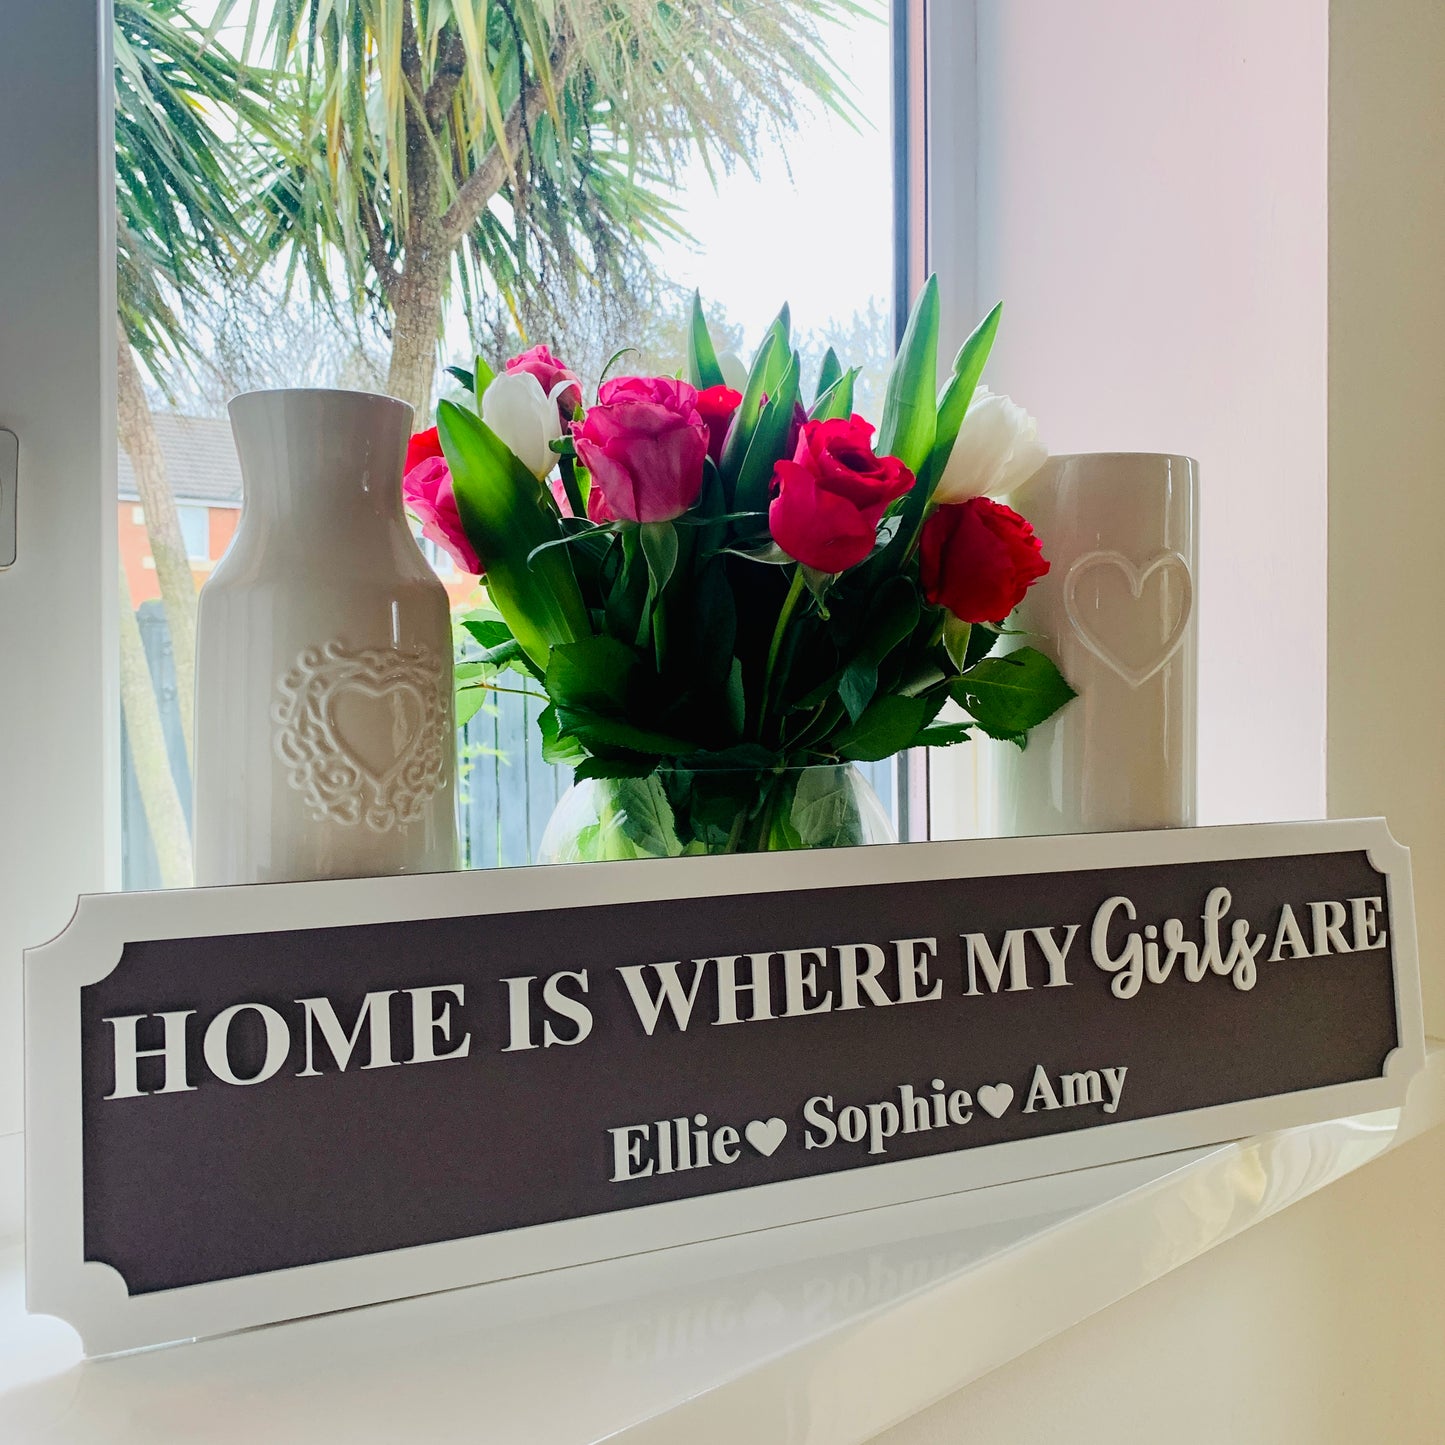 Personalised 3D Railway / Street Sign - Home Is Where My / Our Girls Are